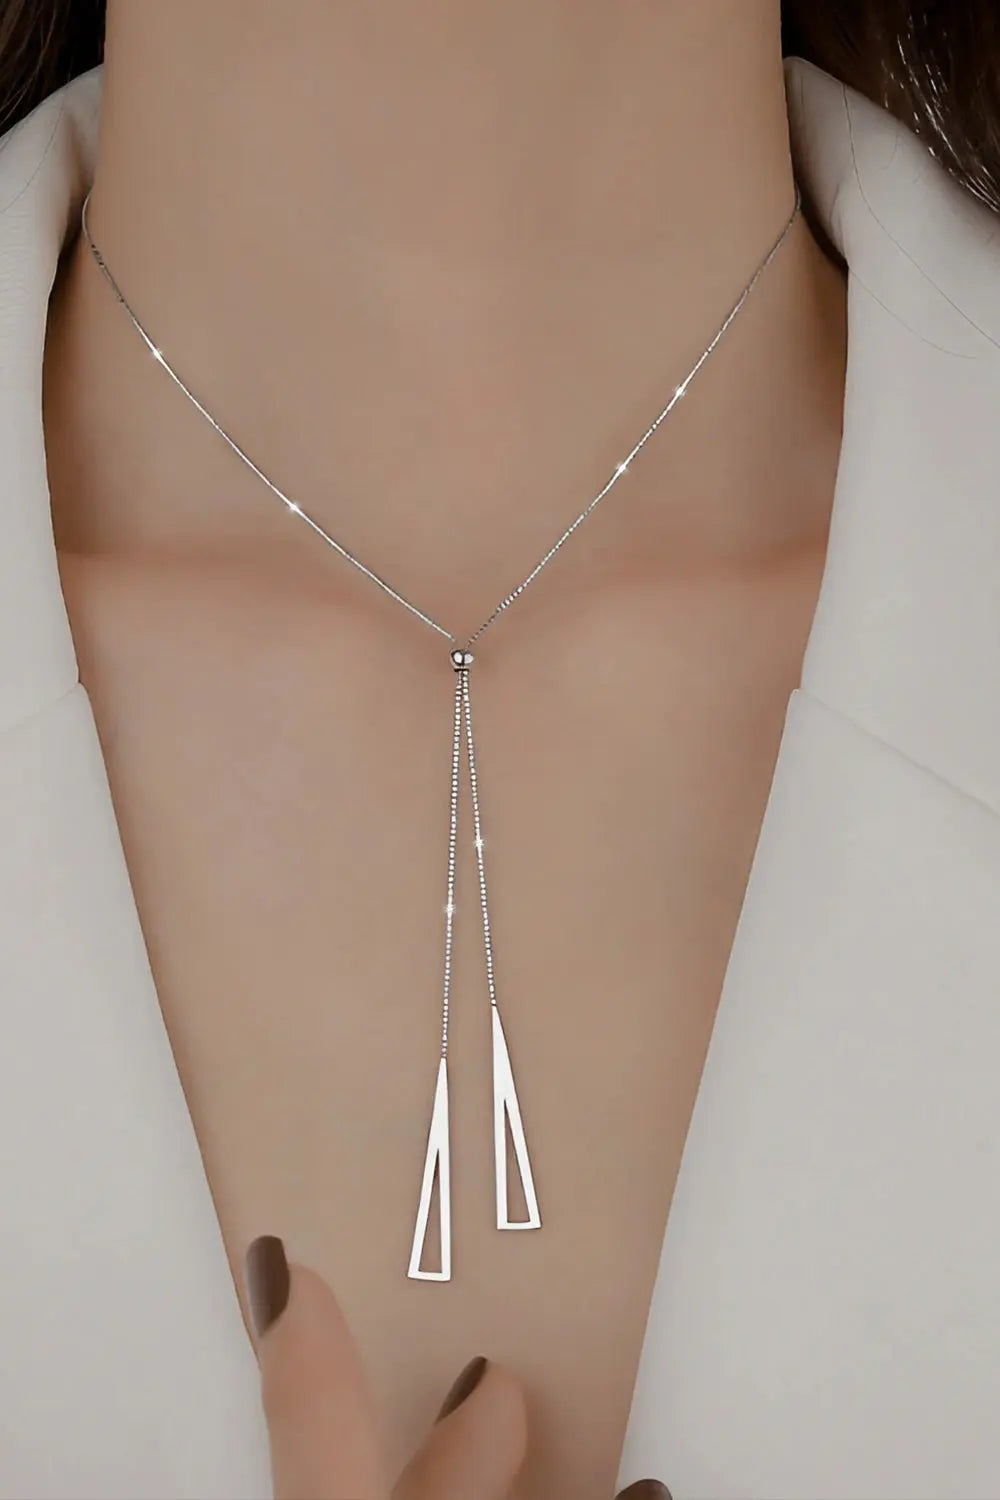 Geometric Triangle Necklace - Silver - Strange Clothes